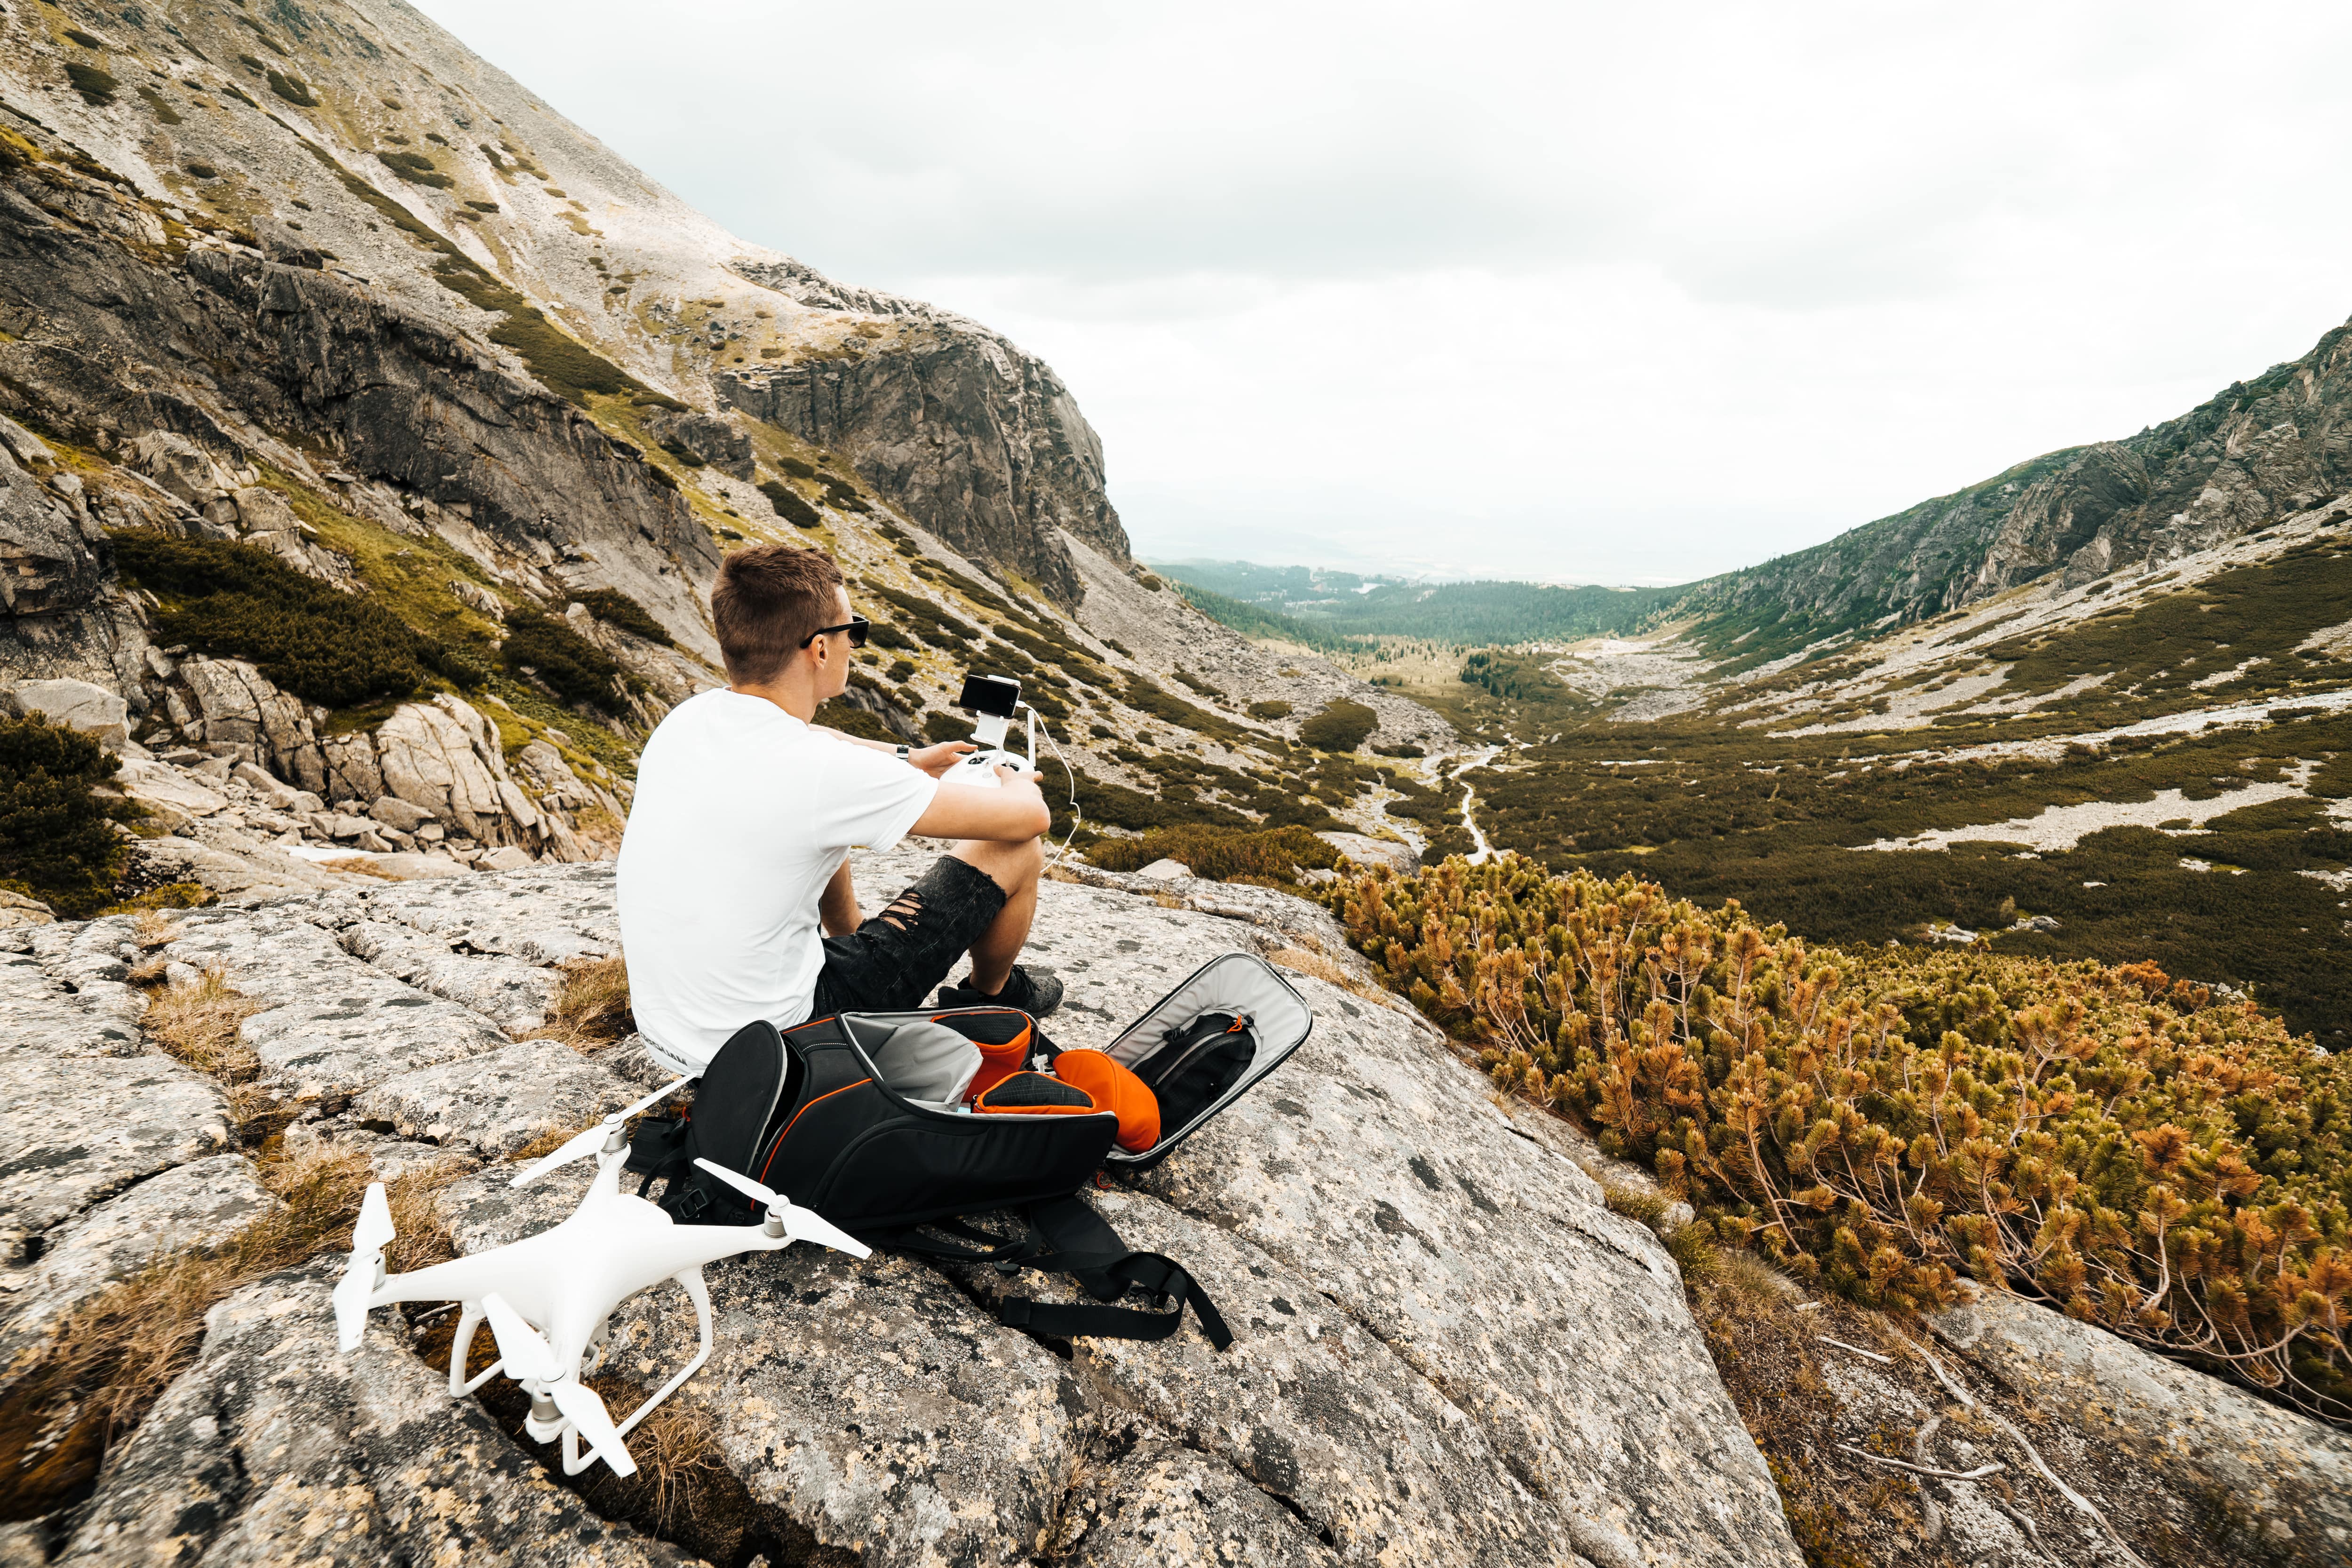 man-setting-up-a-drone-for-aerial-photography-in-mountains-picjumbo-com-min.jpg